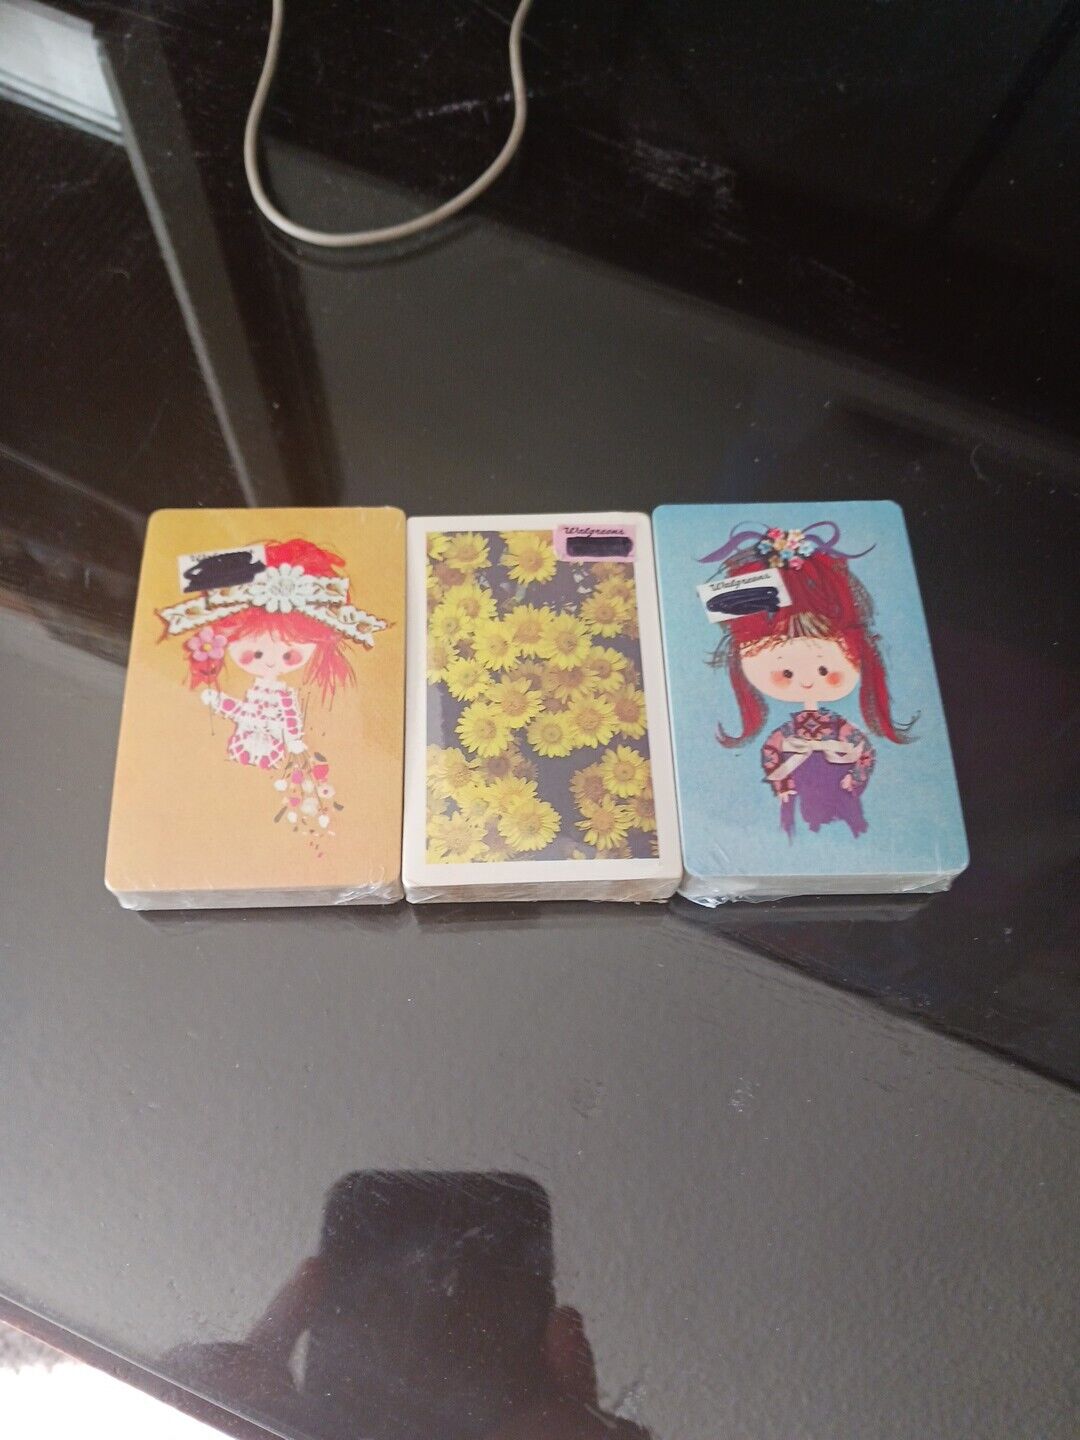 Lot Of 3 1970s Player Cards Trump Arrco Flowers Hippy Fabric Girls Sealed Fun